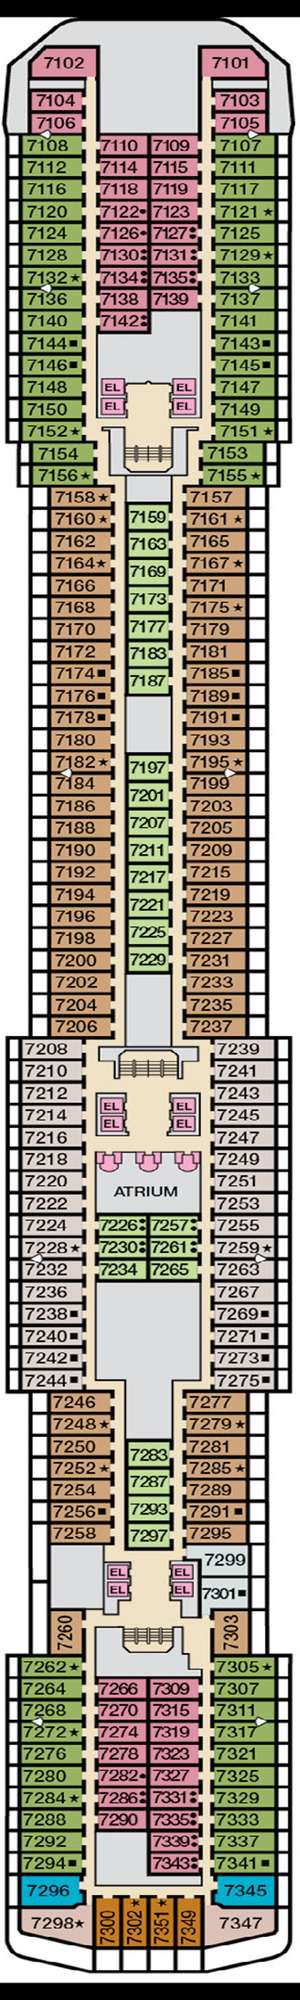 Deck plan for Carnival Miracle